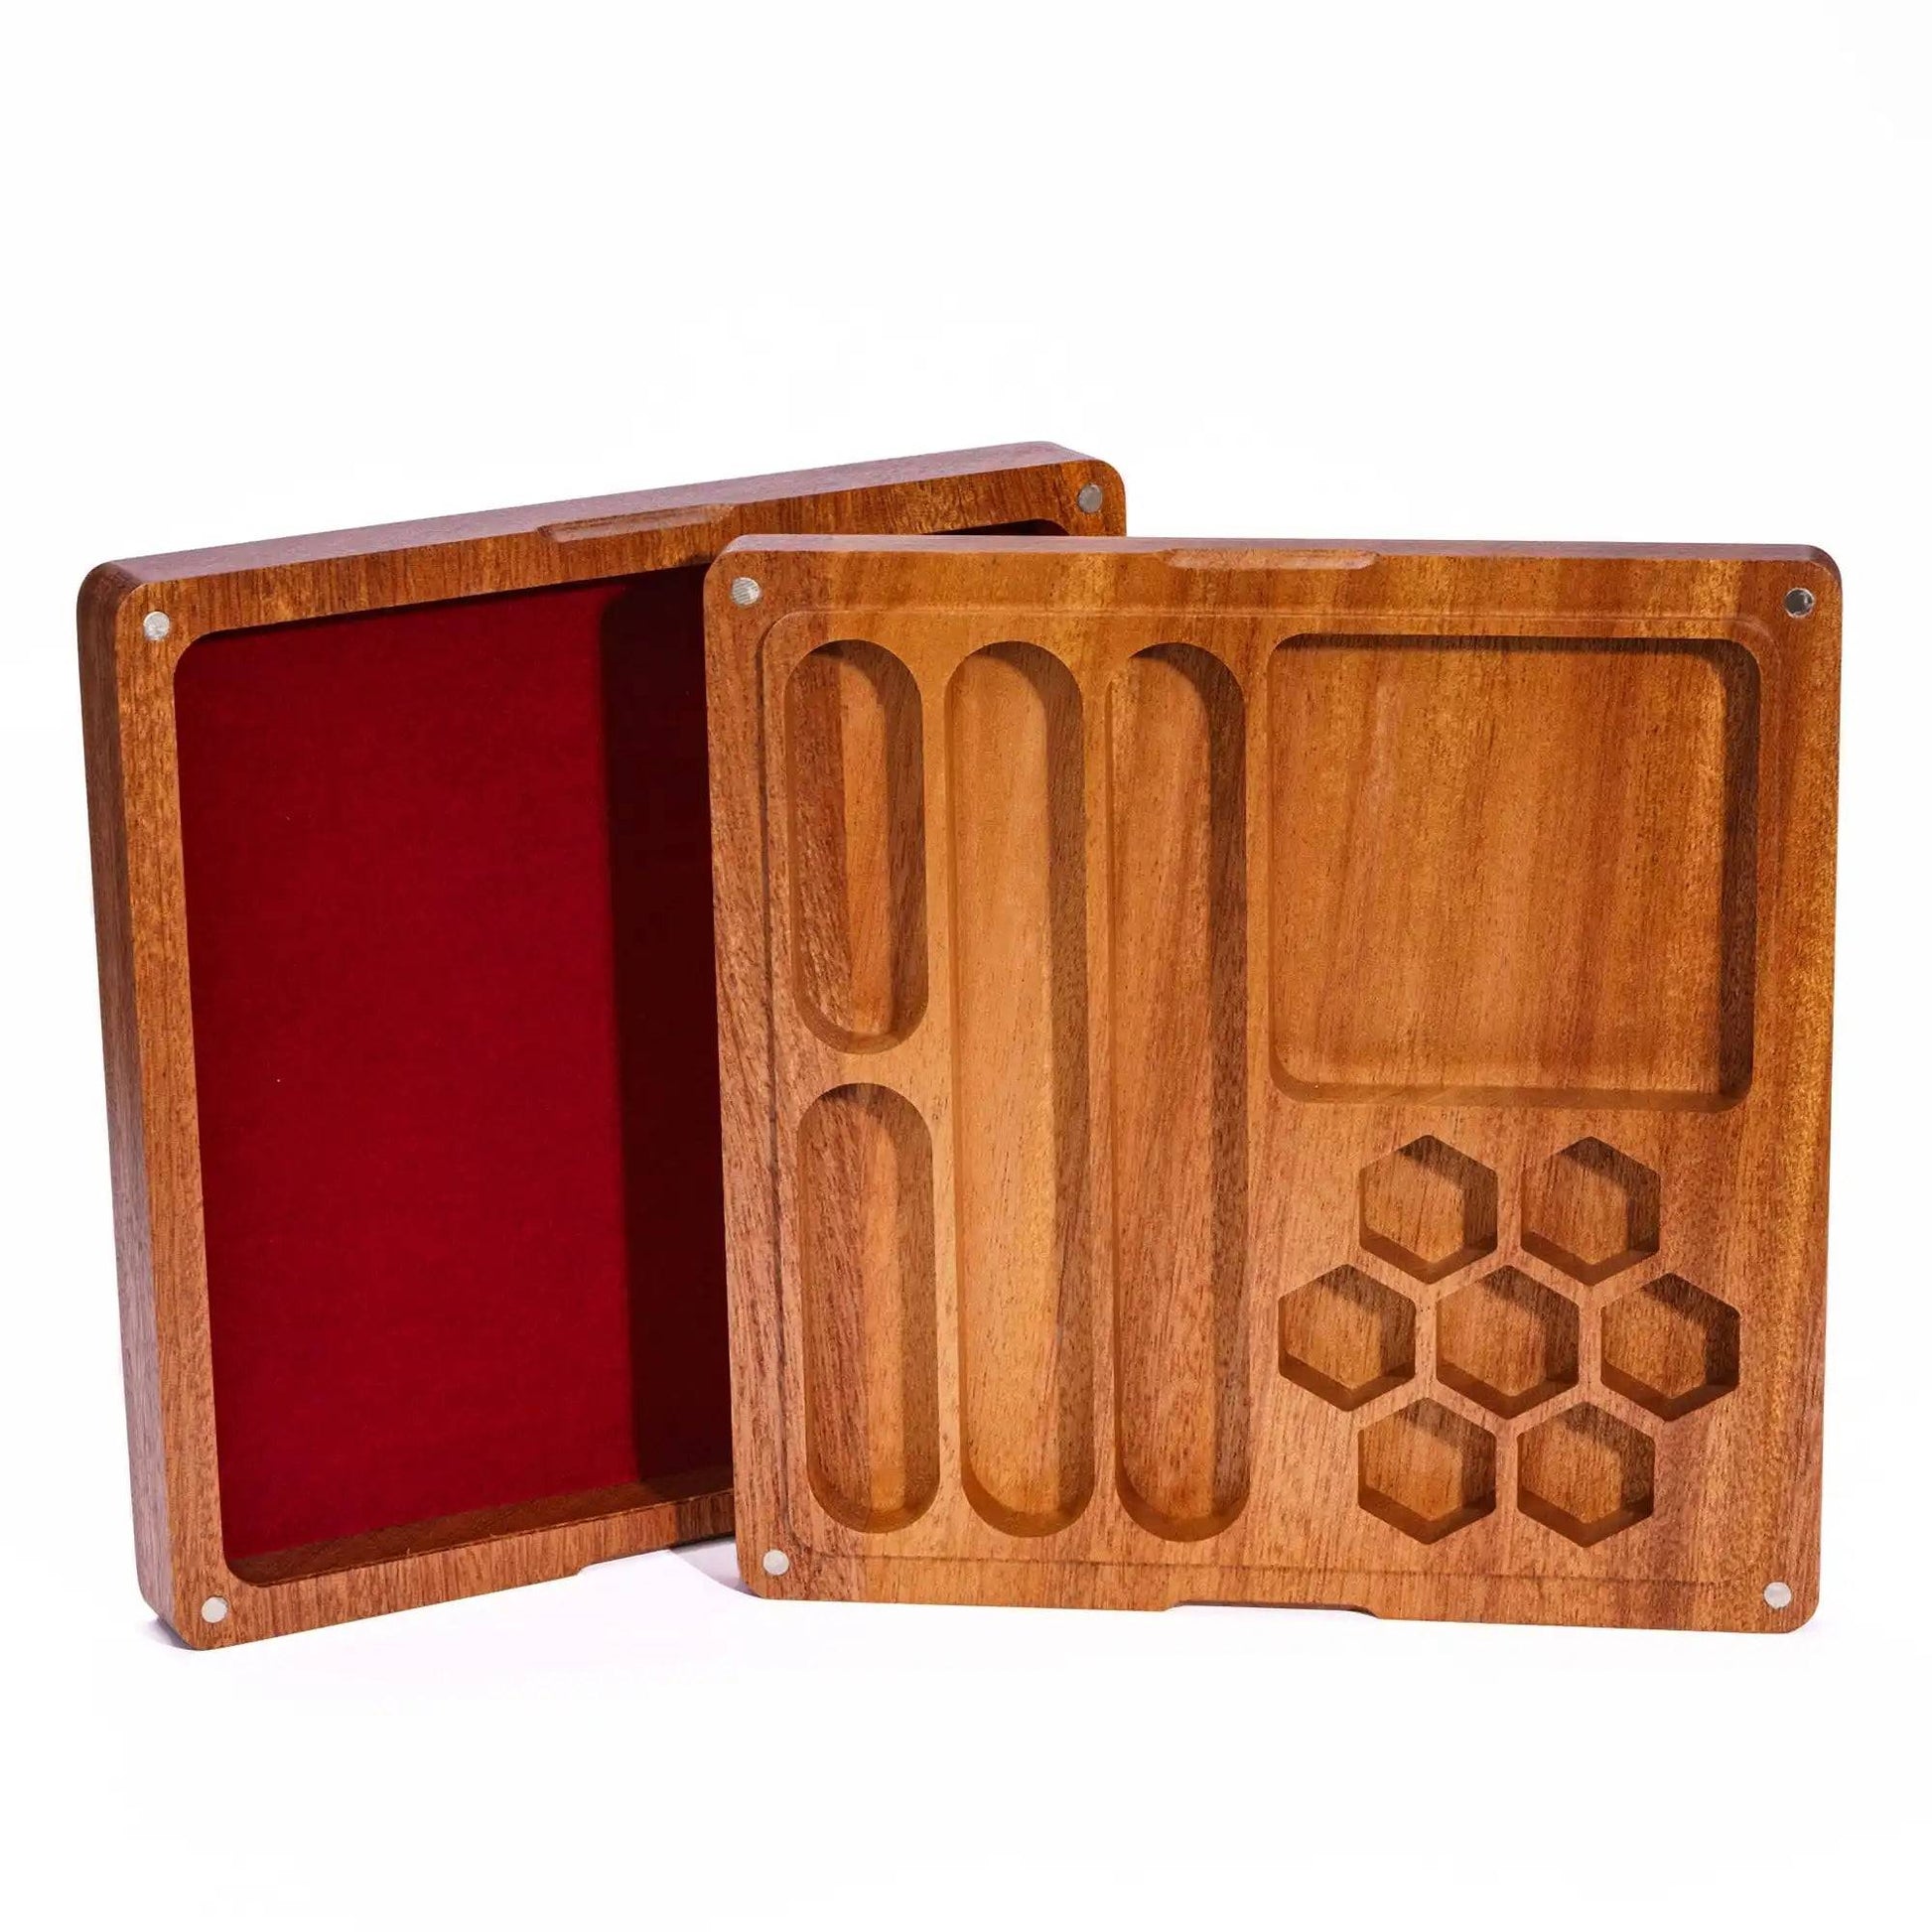 2 in 1 Wooden Dice Case & Dice Tray, High Quality New Square Bamboo Dice Holder for Dice Set, D&D, RPG, Tabletop Games